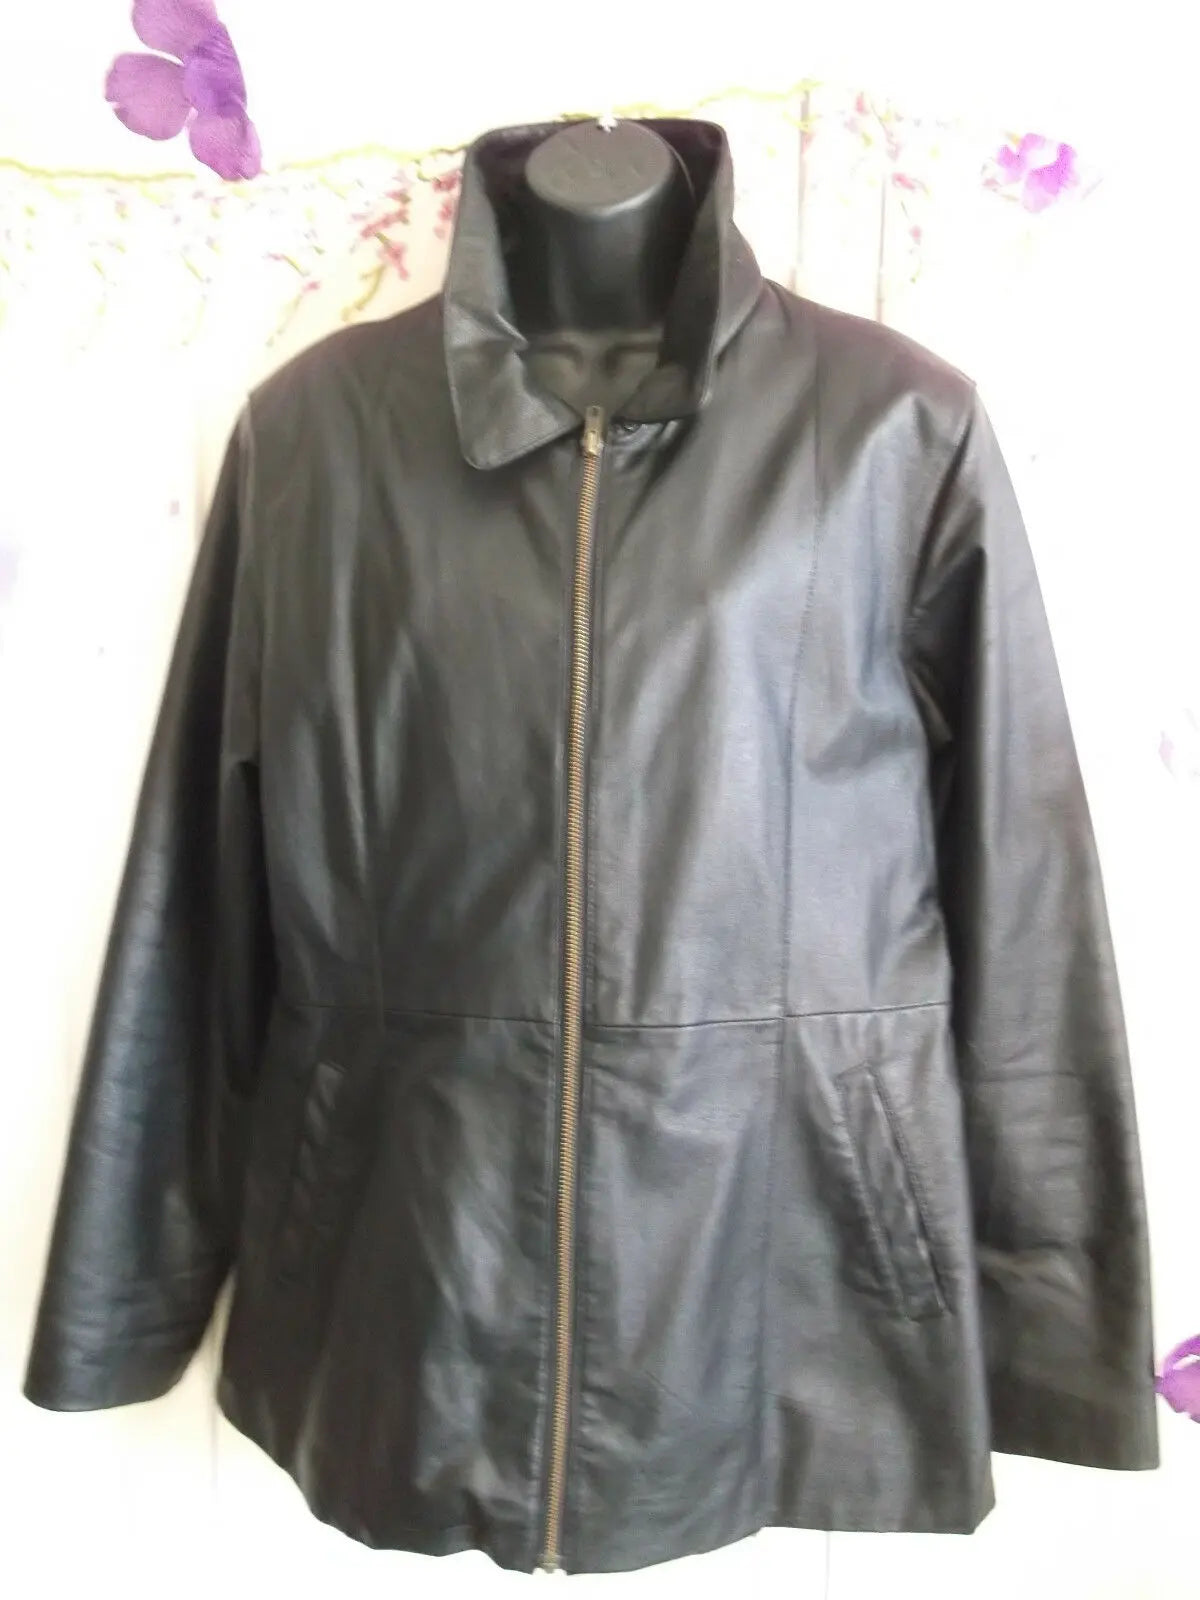 Stunning, Black leather coat 3/4 length,zip front,size 12.Bust 43".excellent con Unbranded